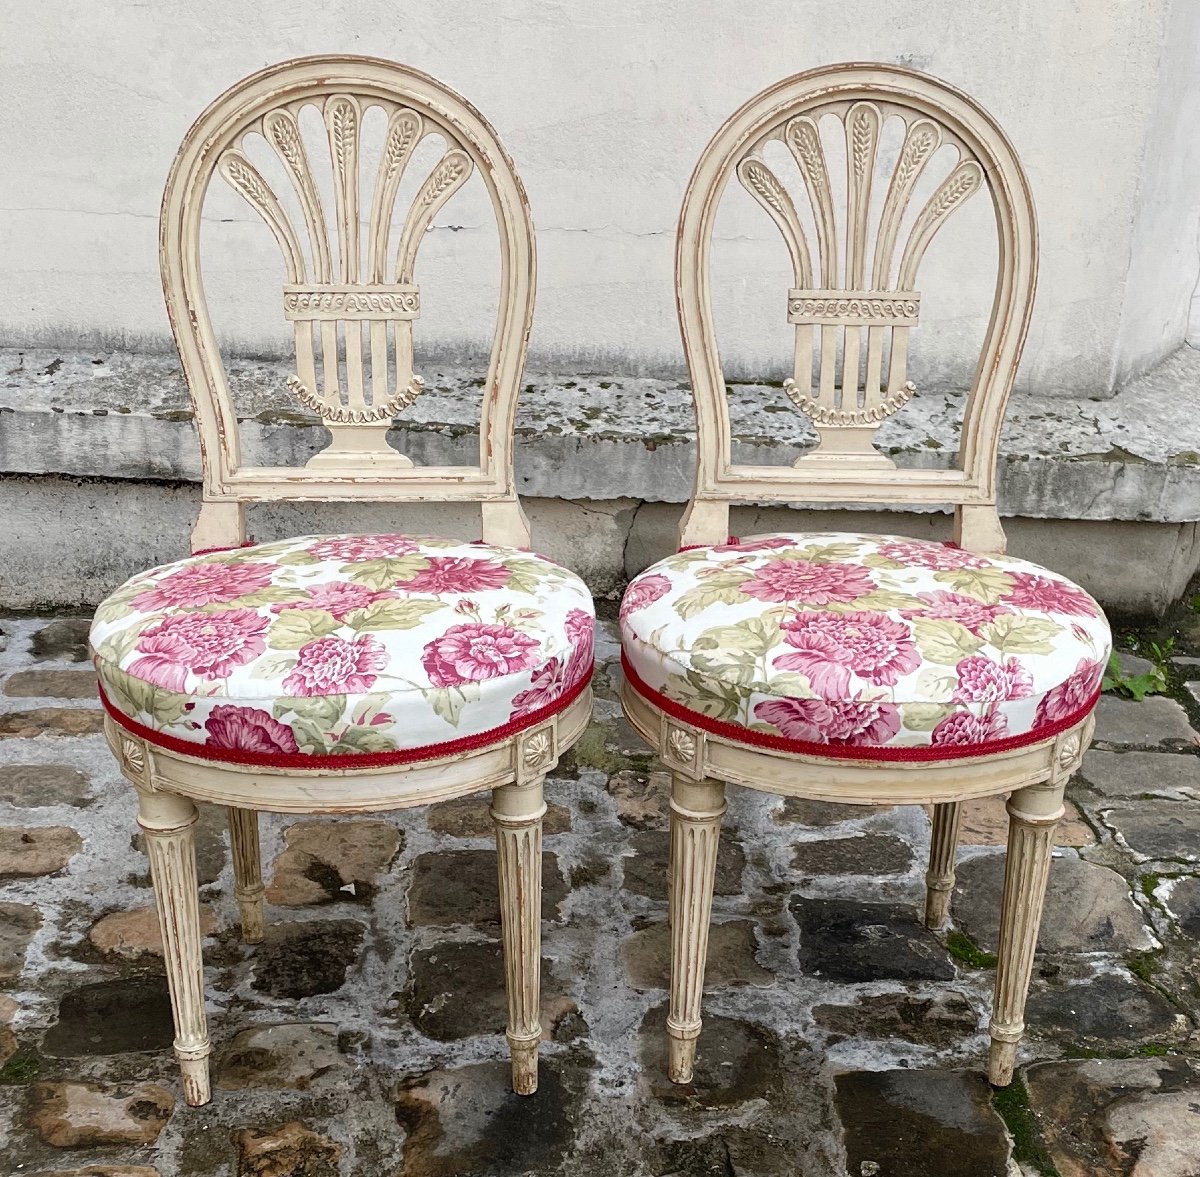 Pair Of Louis XVI Style Chairs